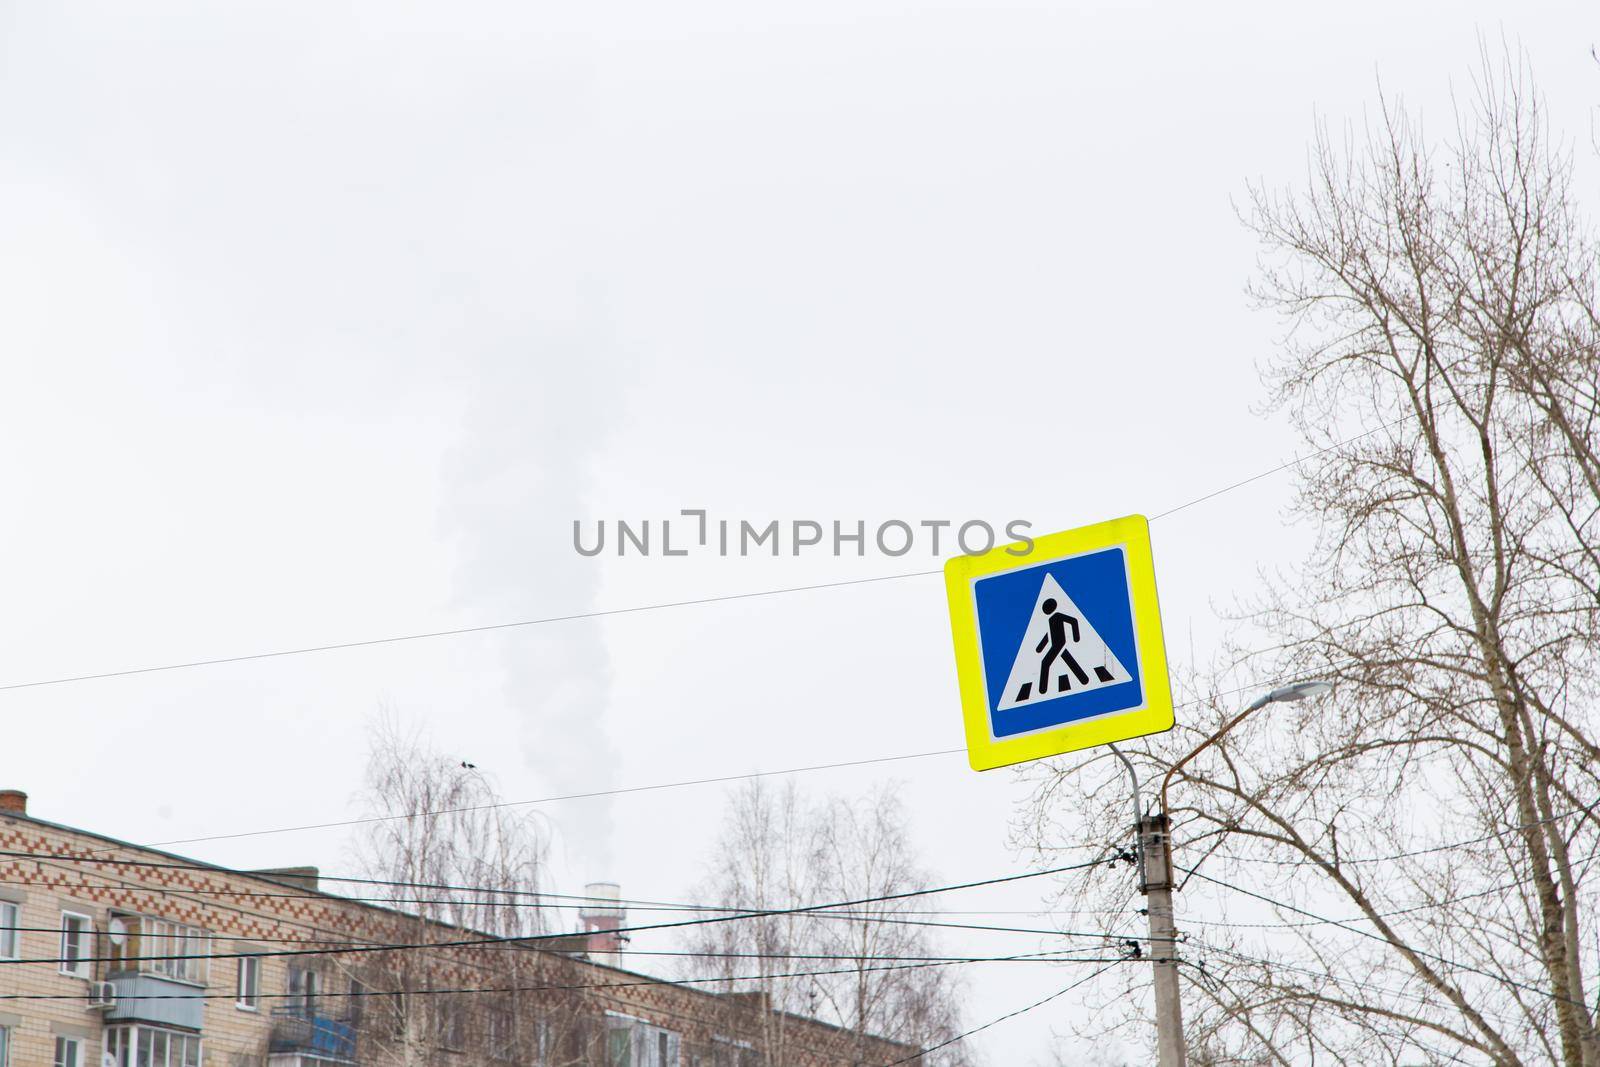 A pedestrian crossing road sign hangs over the carriageway.  by anarni33